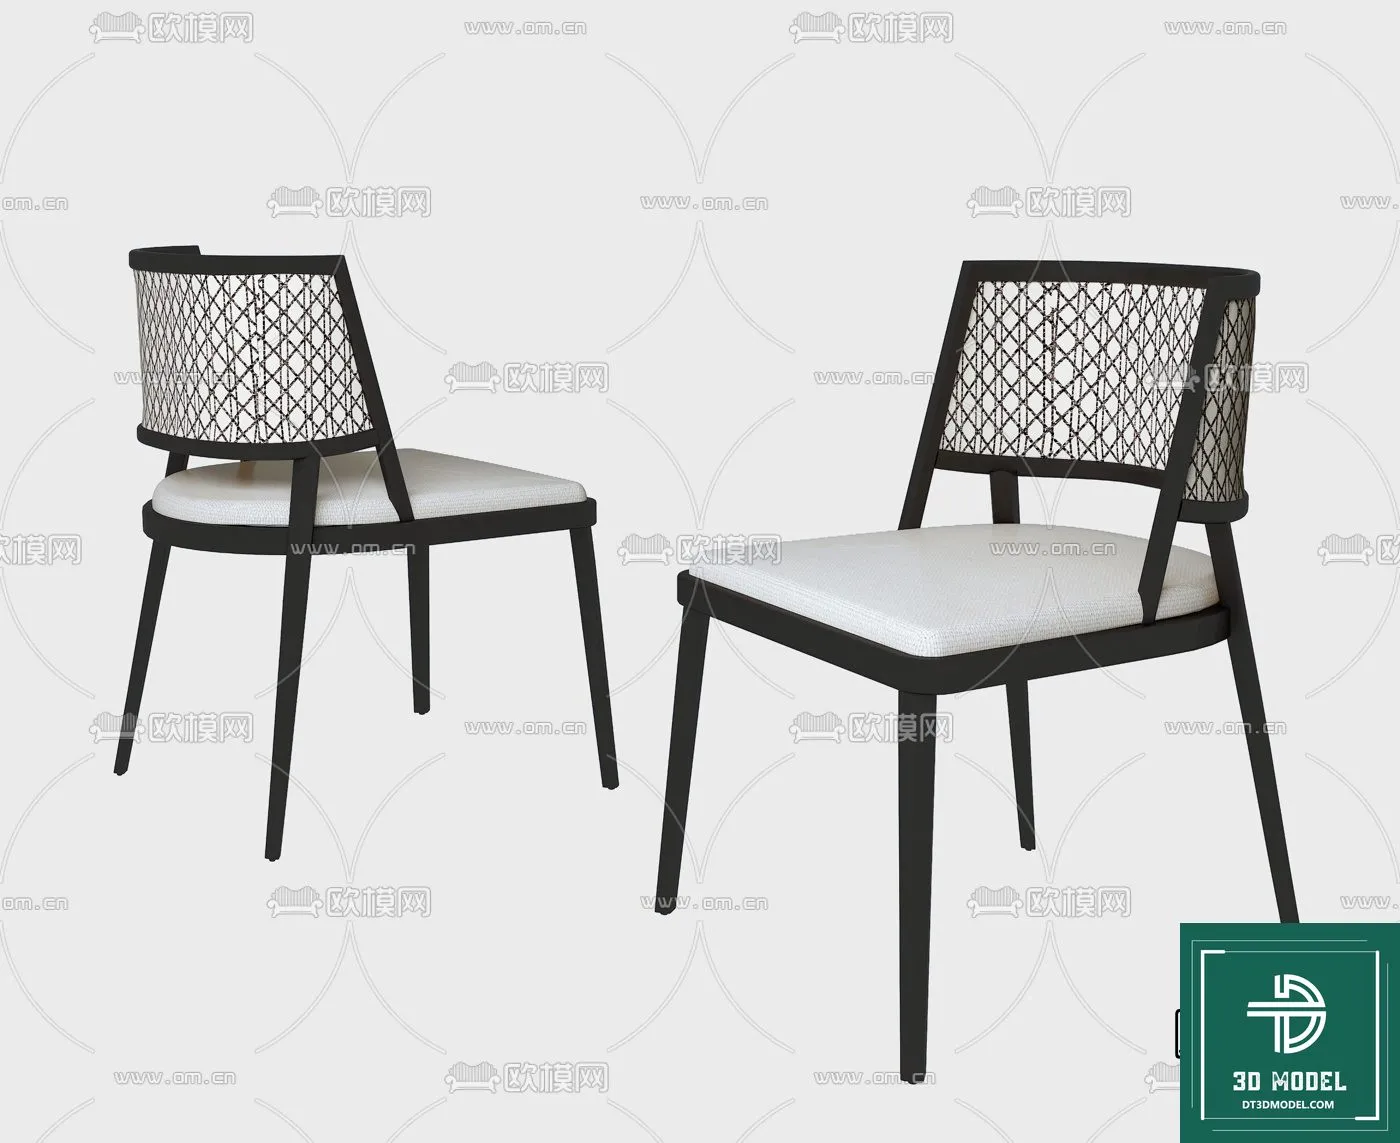 INDOCHINE STYLE – 3D MODELS – 019